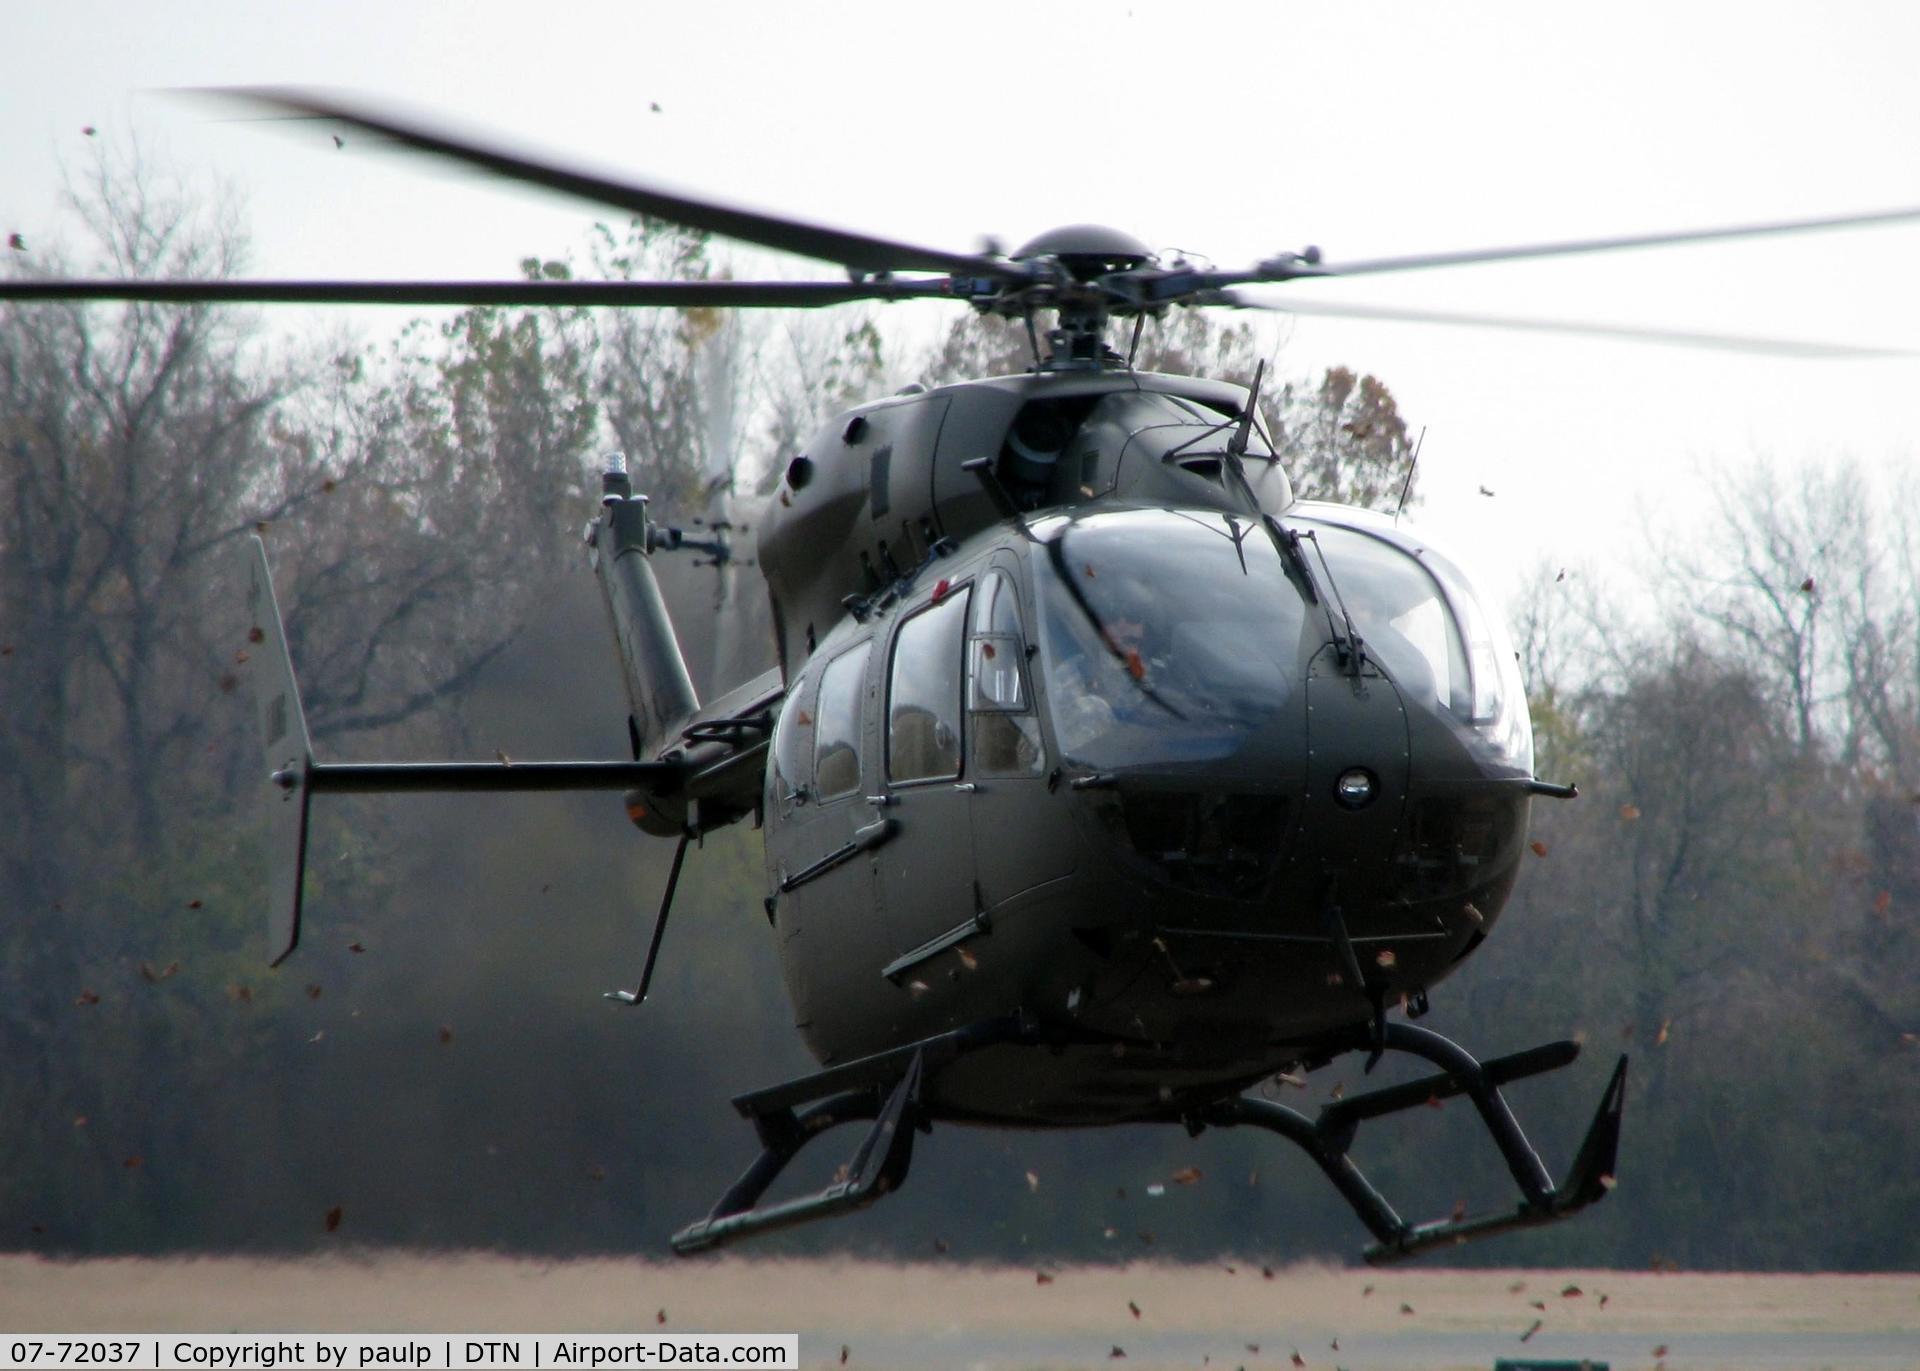 07-72037, 2007 Eurocopter UH-72A Lakota C/N 9178, Kicking up some leaves while touching down at Downtown Shreveport.